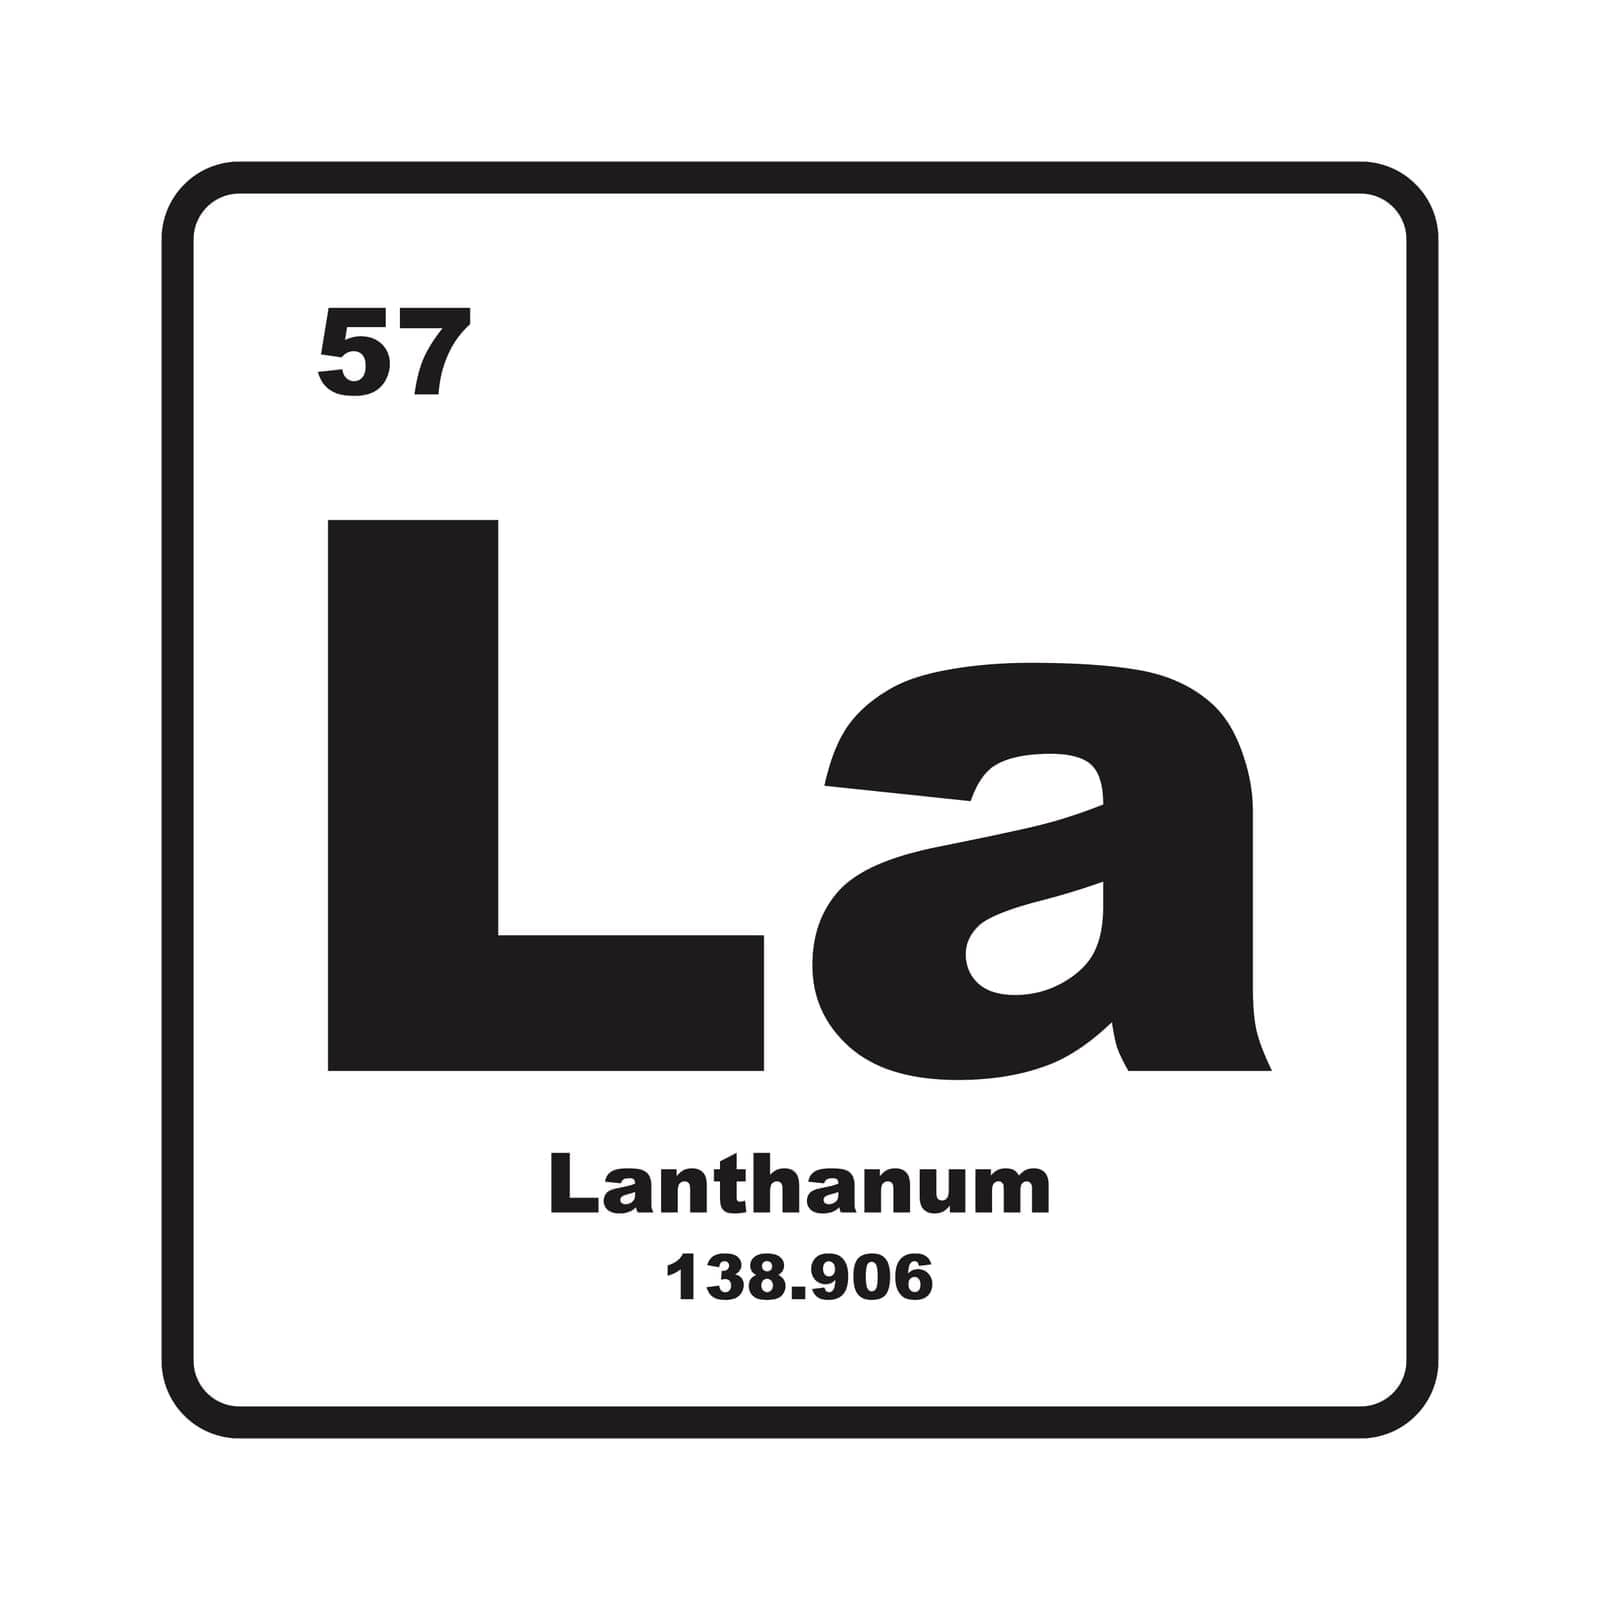 Lanthanum icon, chemical element in the periodic table